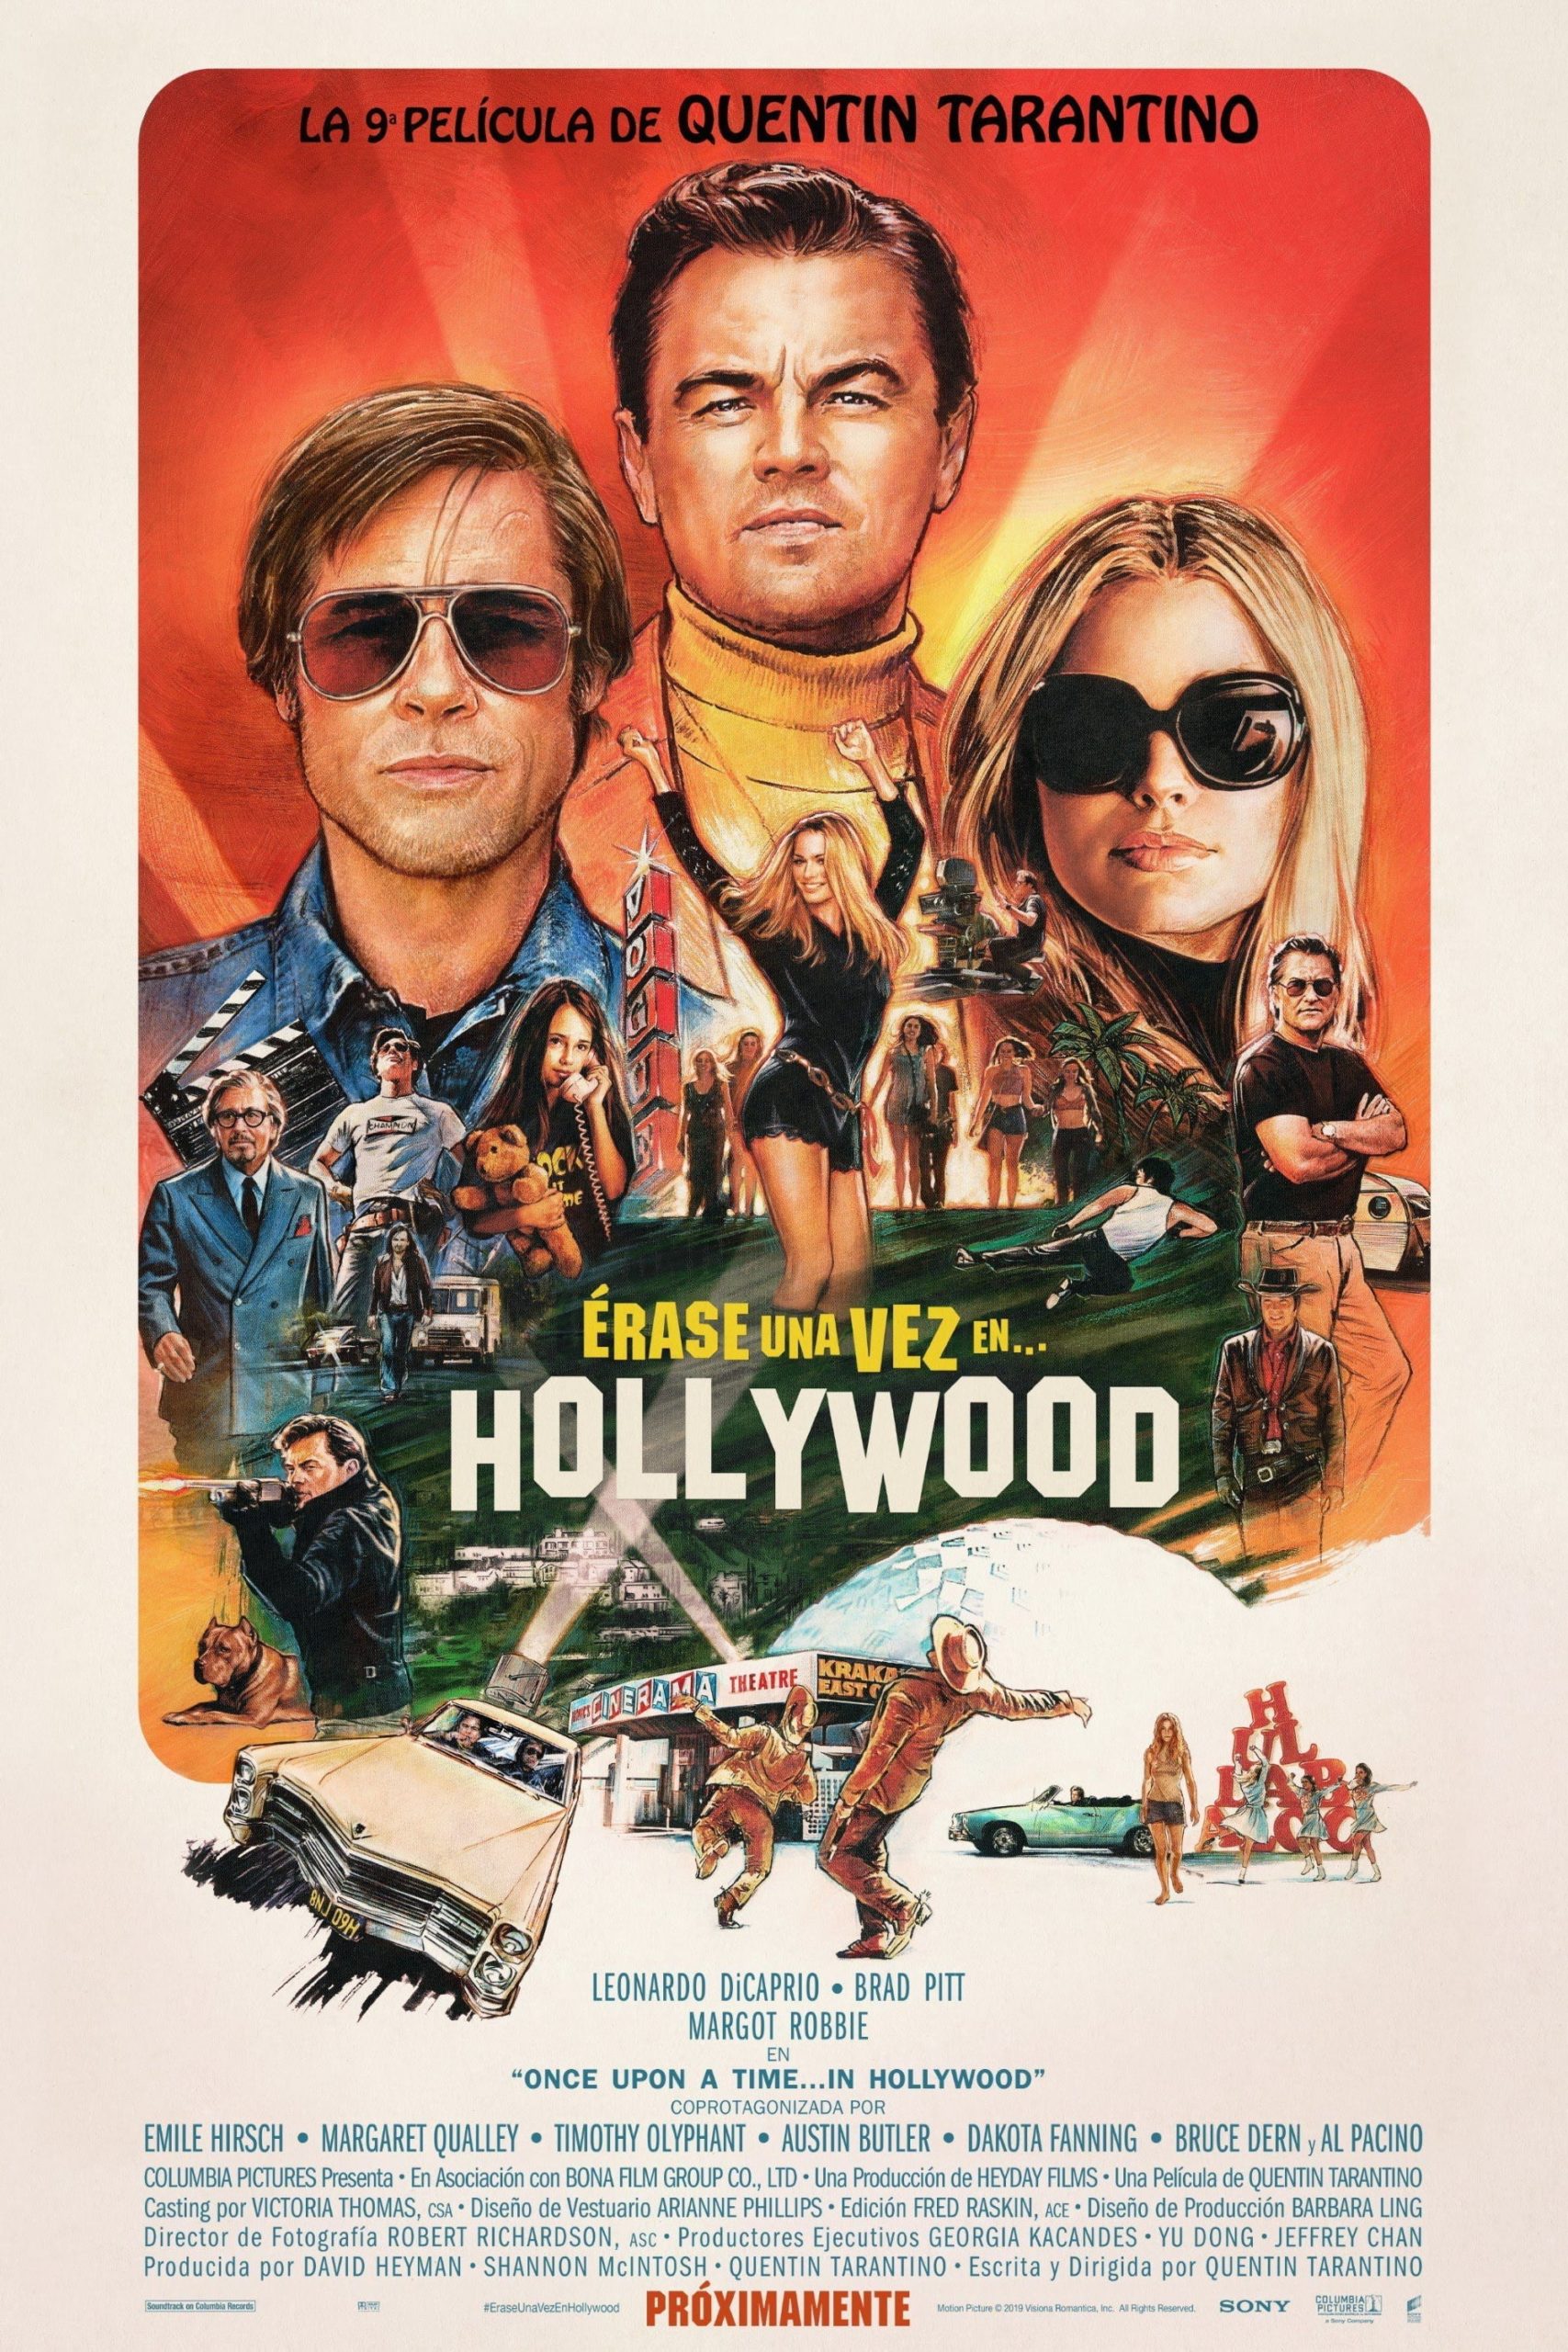 Poster de la película "Once Upon a Time in Hollywood"